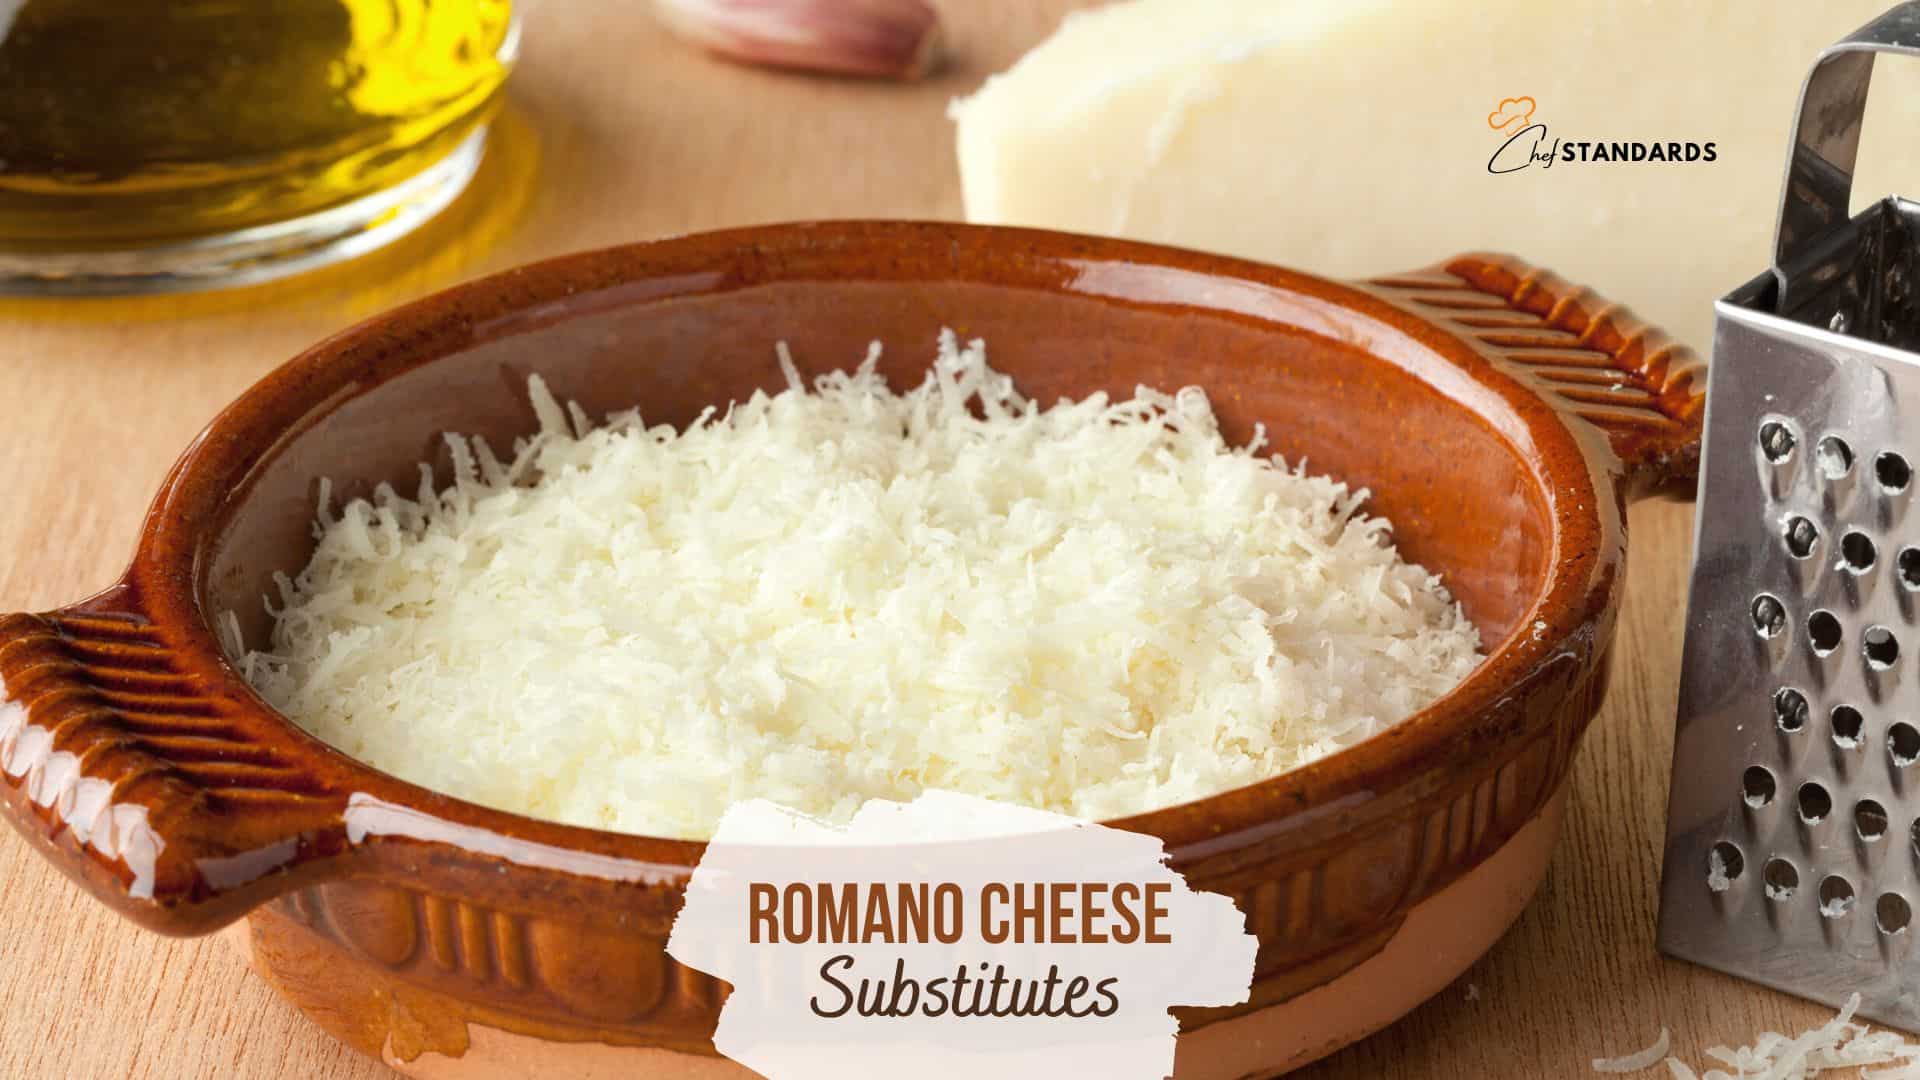 Romano Cheese sitting at table